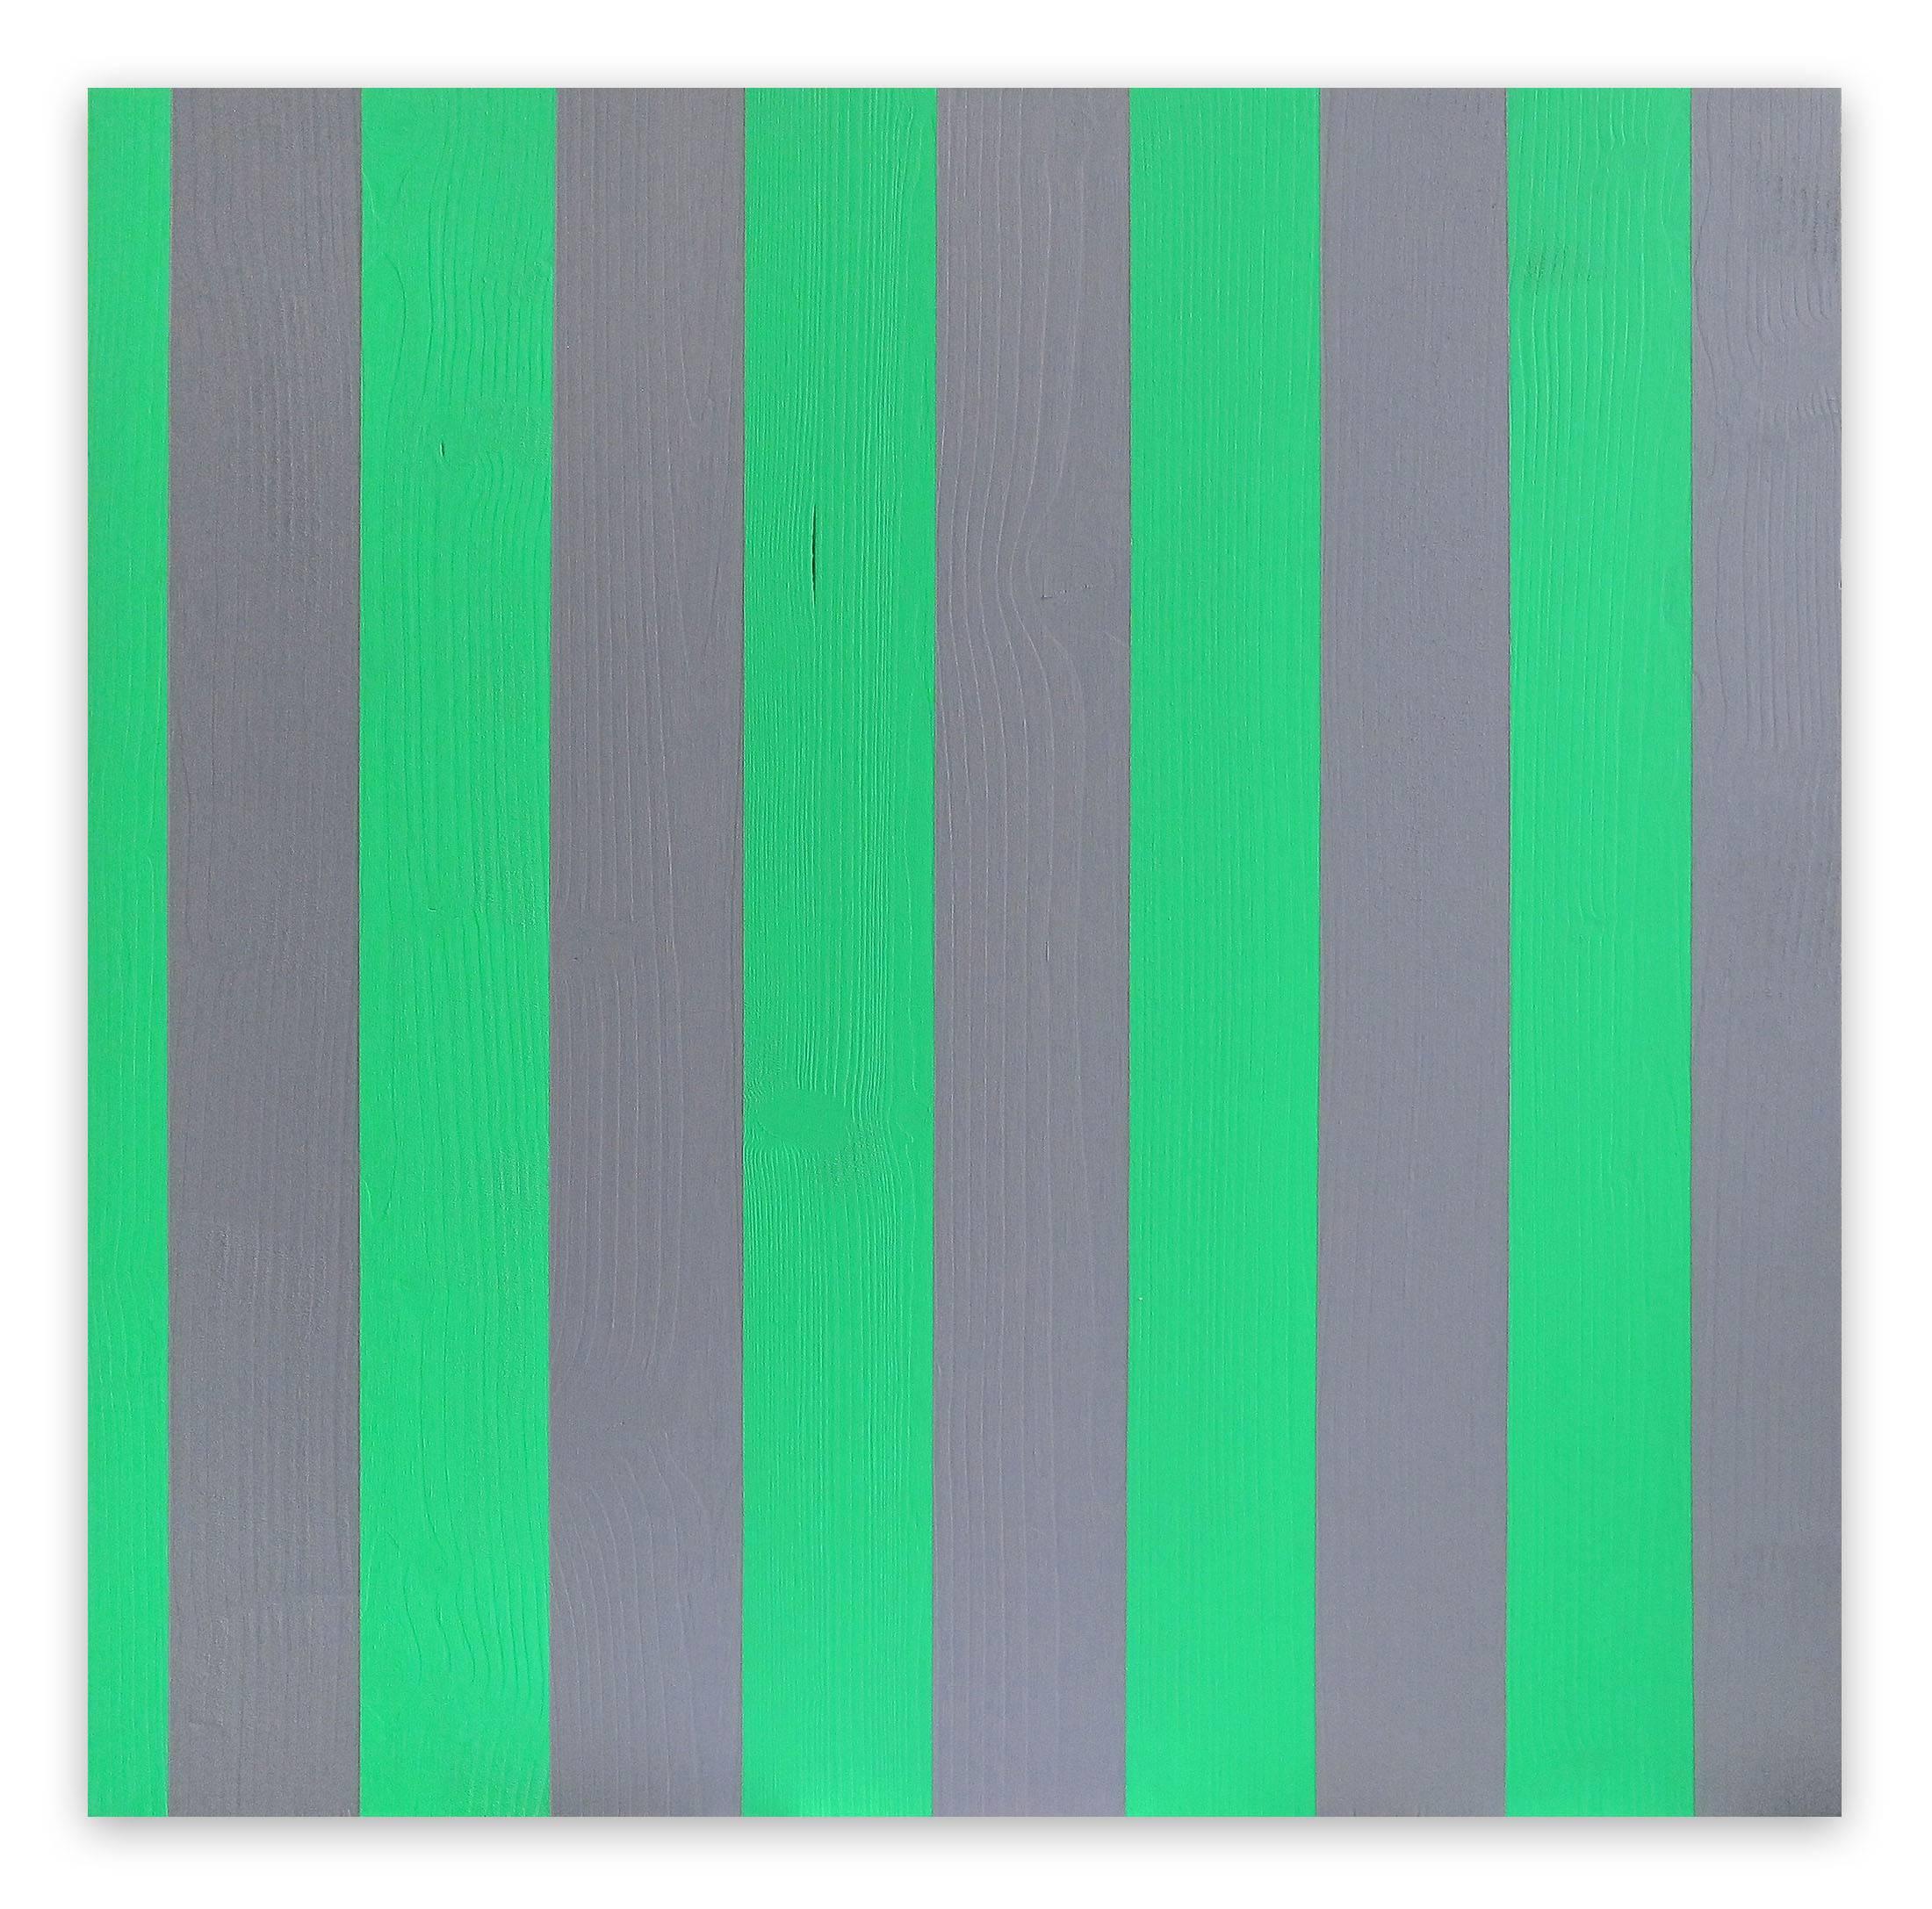 Untitled 20, 2009 (Abstract Painting)

Acrylic on wood - Unframed

This work is one of many similar works consisting of acrylic painted cut off wood.

The rhythm of the vertical stripes are resulting from the wooden sections glued by the